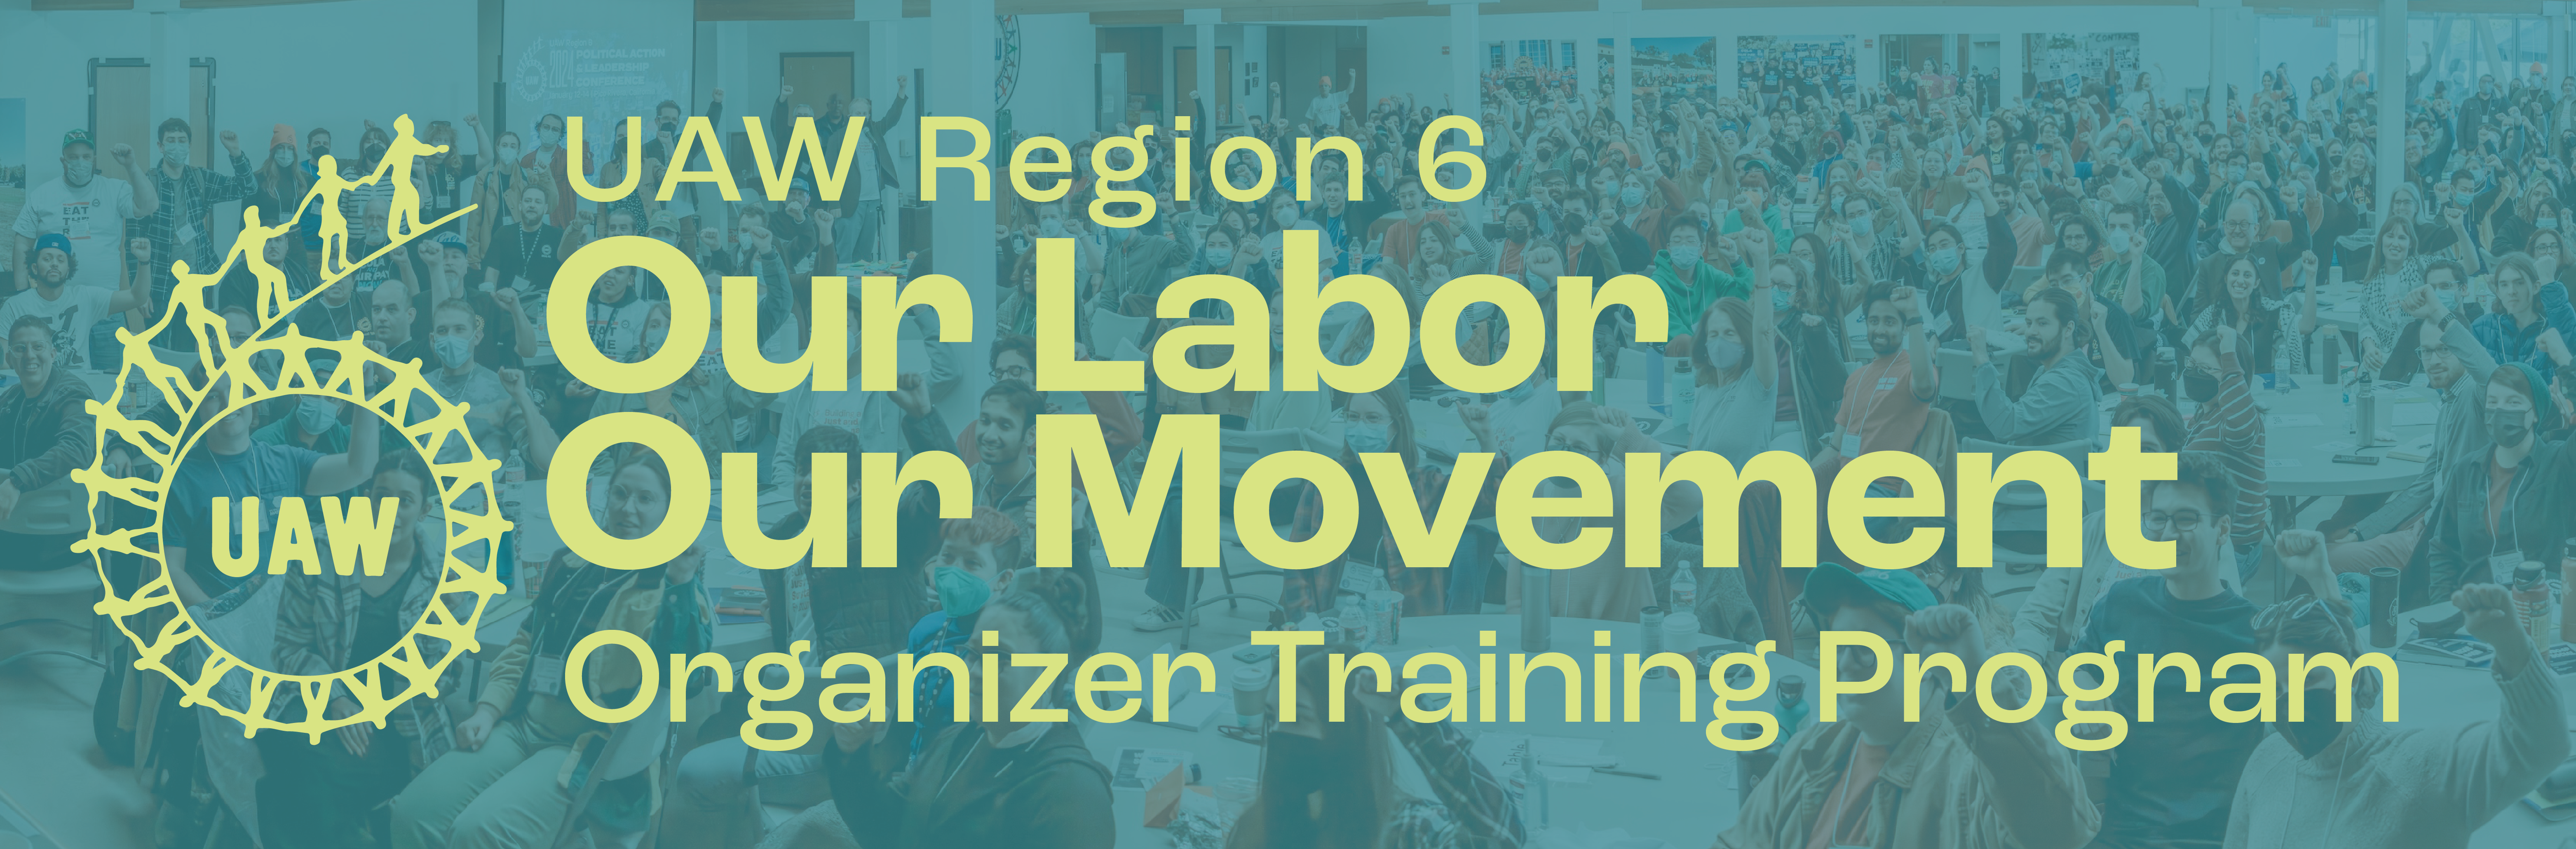 Teal banner with lime green text: UAW Region 6 Our Labor Our Movement Organizer Training Program, Applications due March 22. 